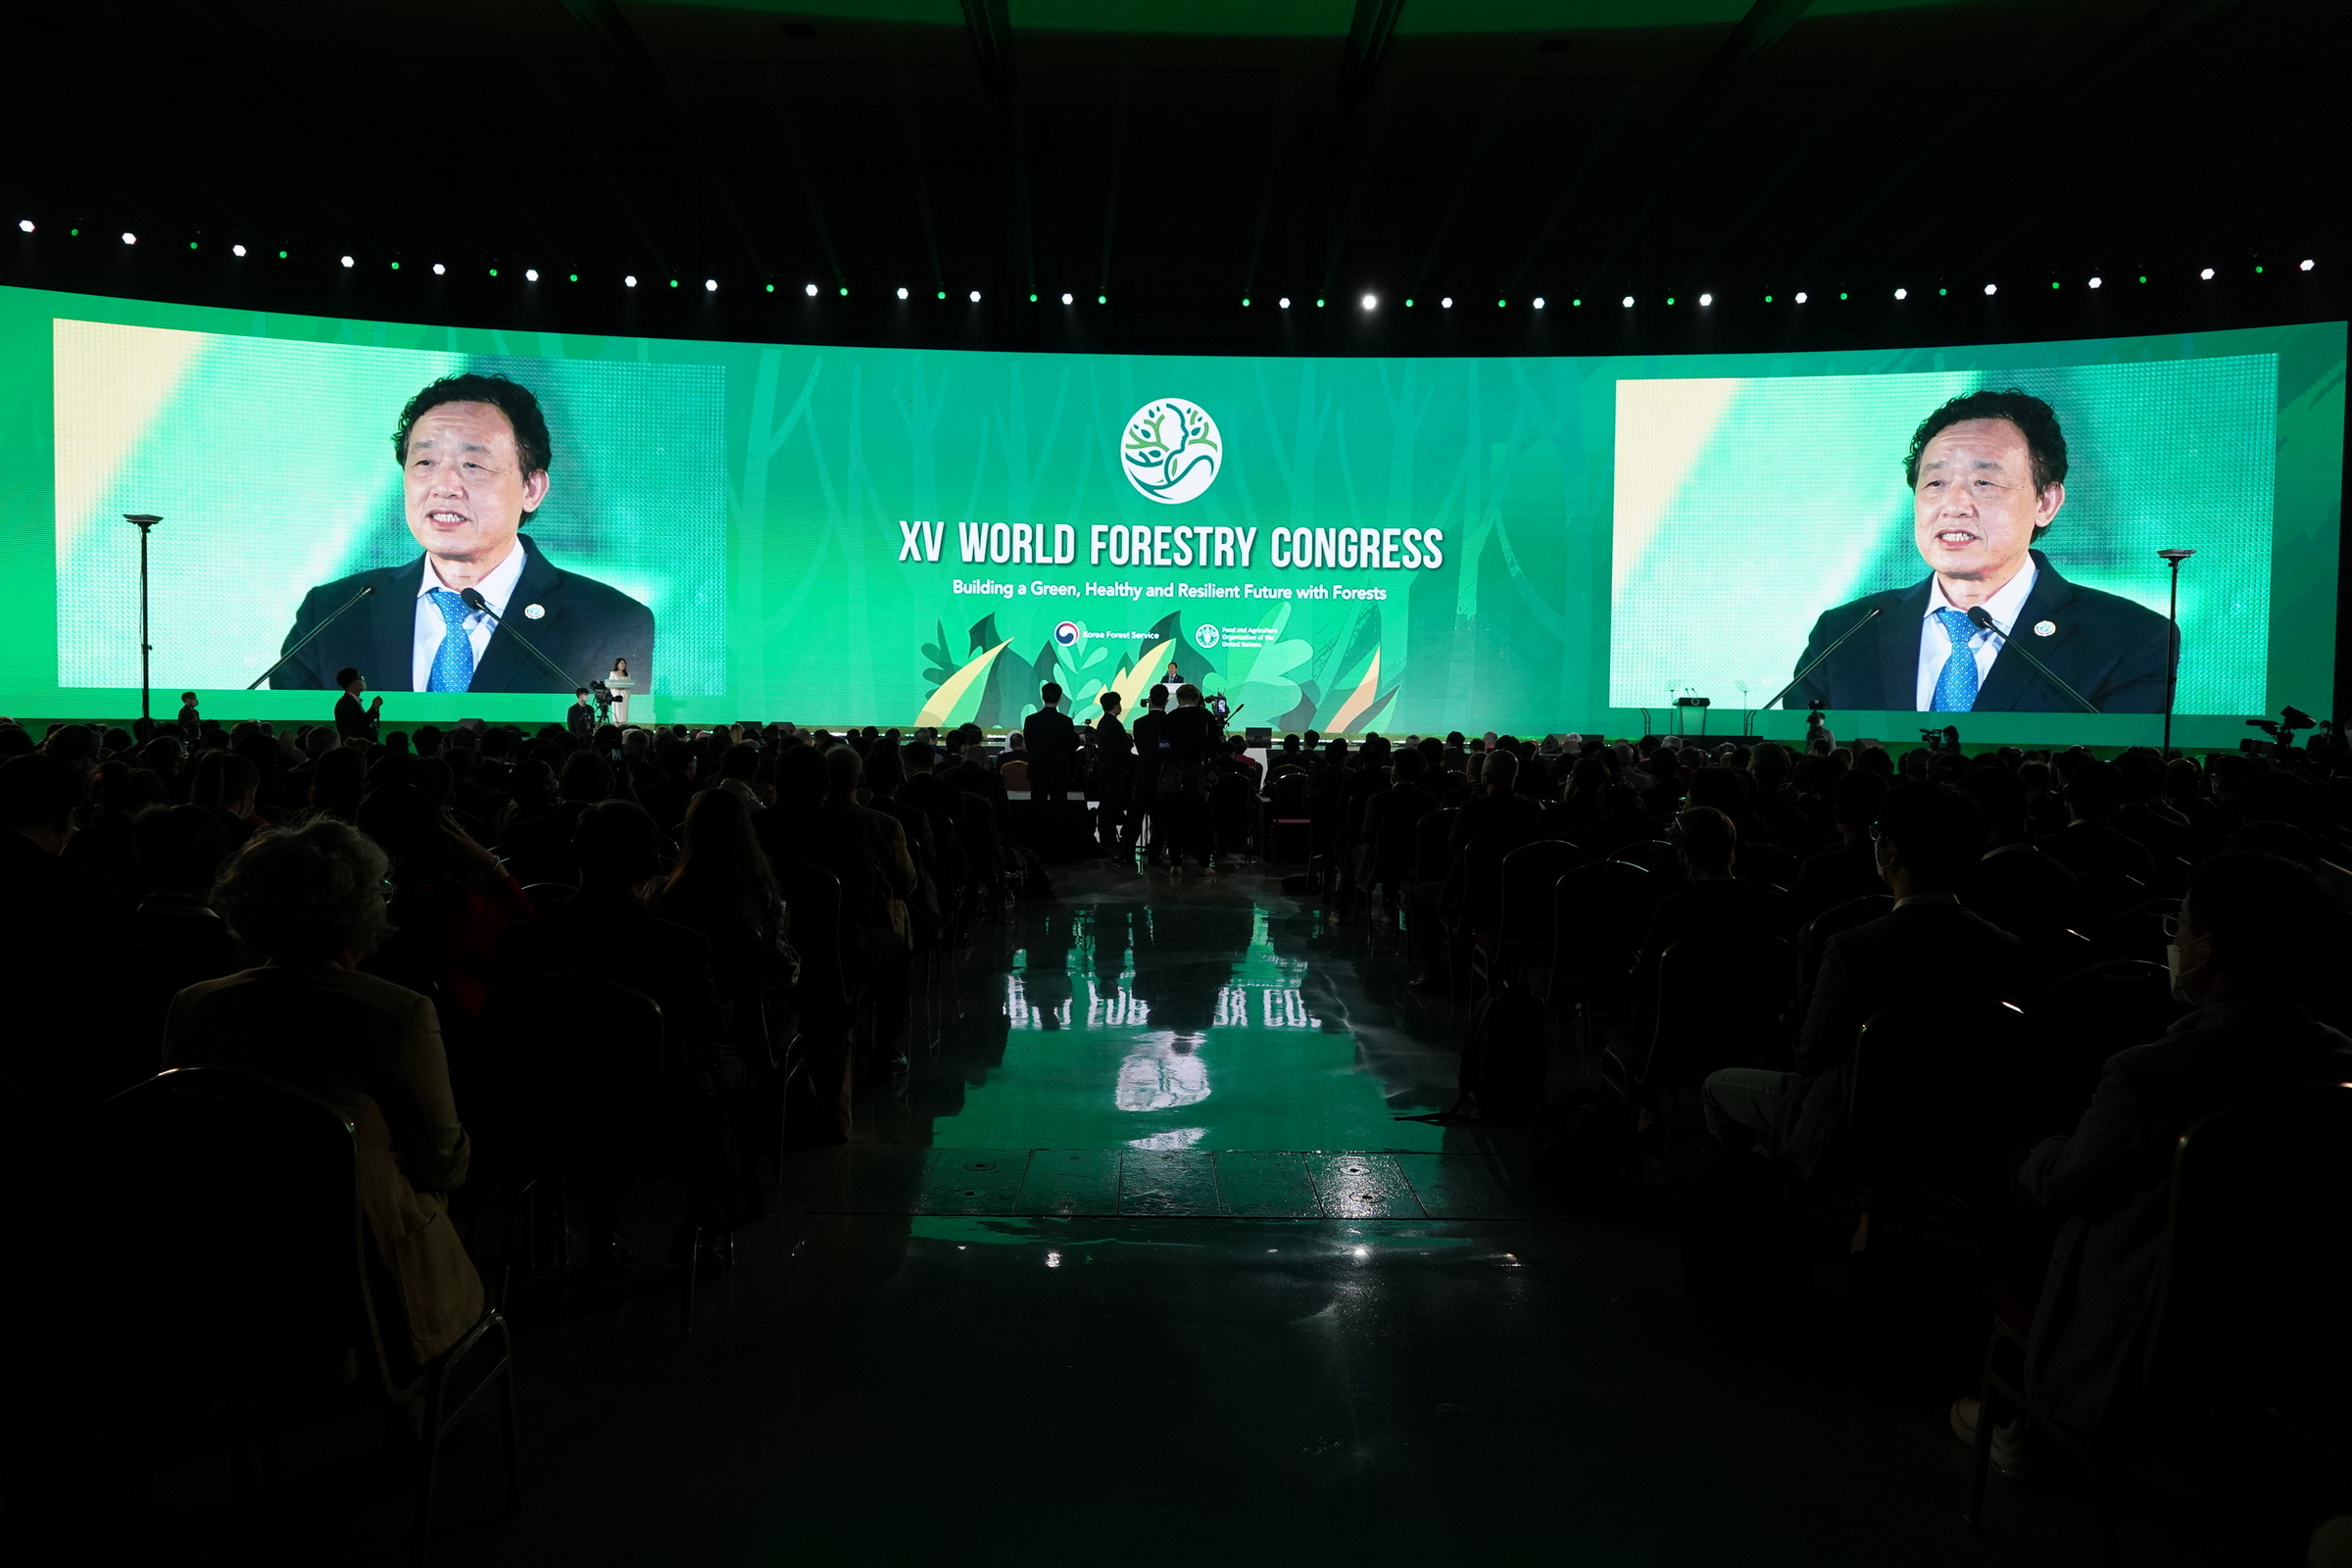 XV World Forestry Congress Ends with Great Success 이미지2